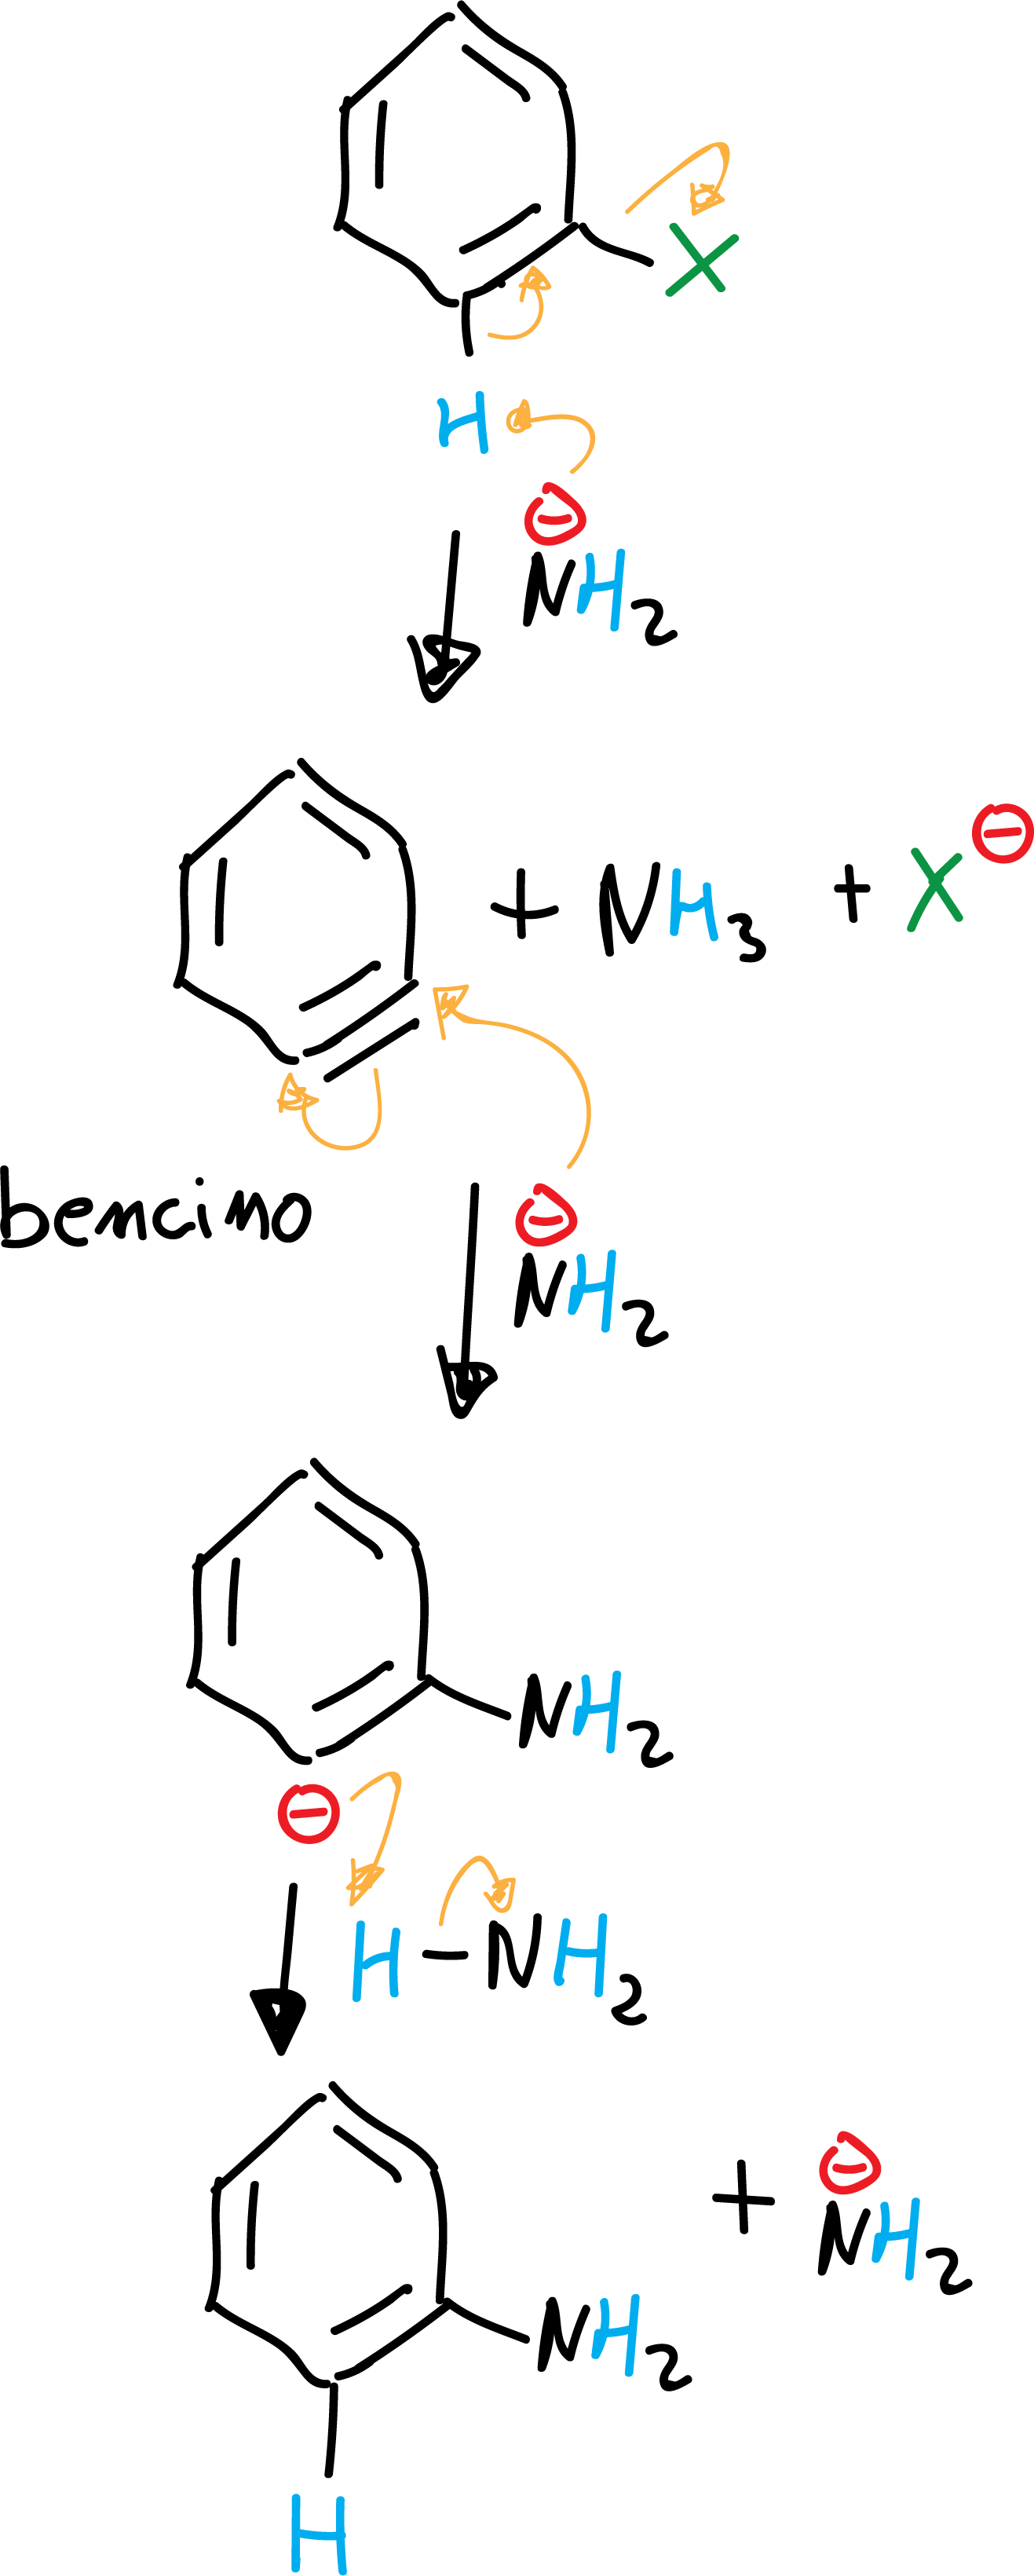 Aromatic nucleophilic substitution SNAr elimination-addition mechanism via benzyne